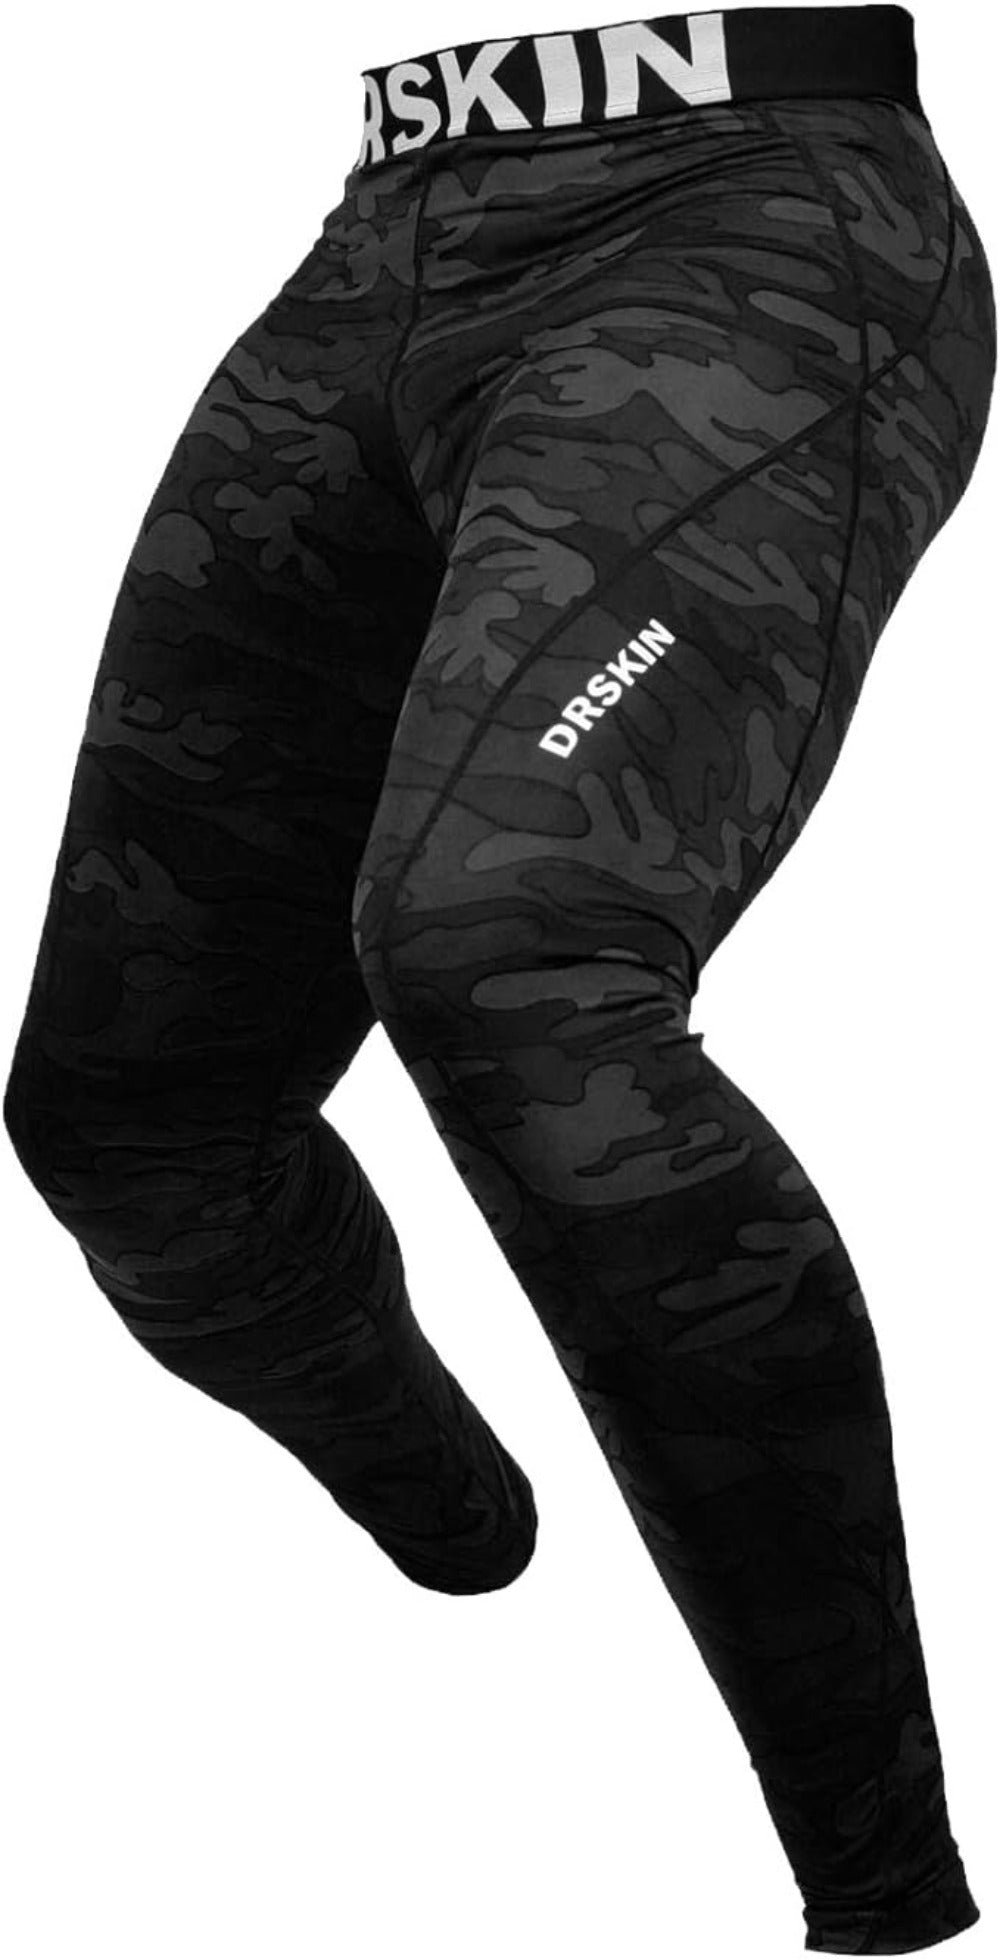  DRSKIN Men's Compression Pants Tights Leggings Sports Baselayer  Running Workout Active Athletic Gym Performance (DRG167, S) : Sports &  Outdoors